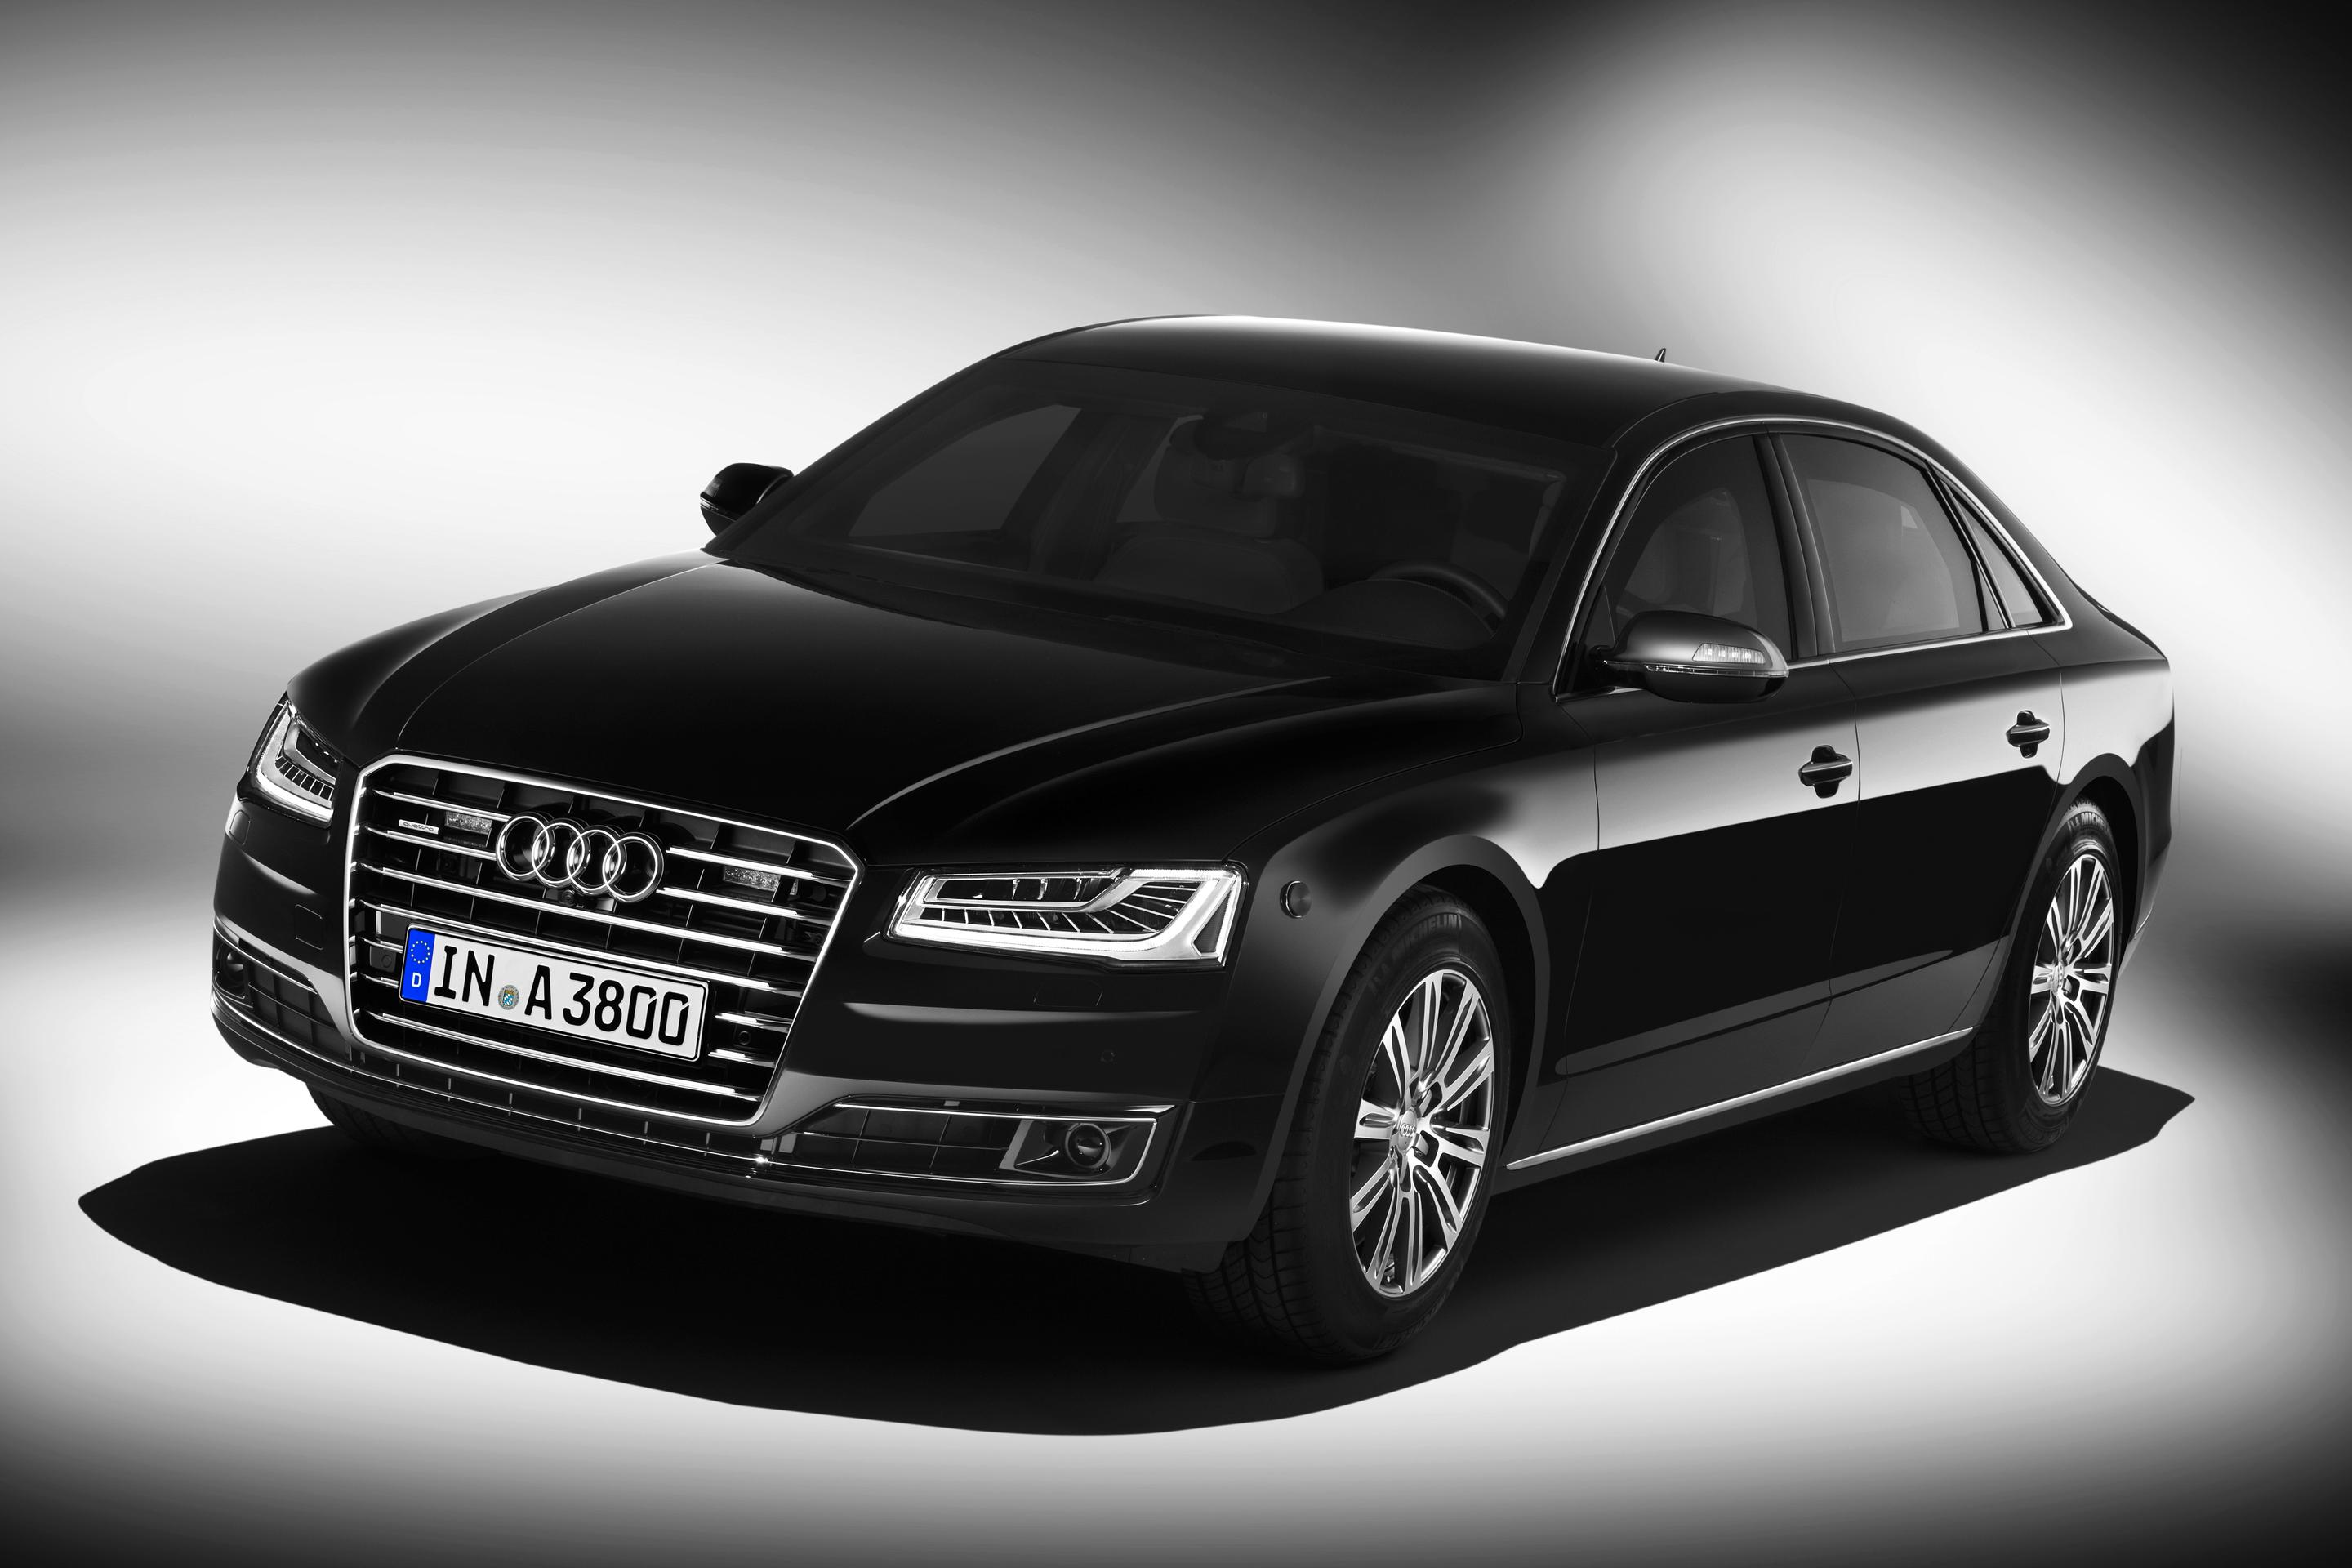 Audi's A8 L Security sedan takes road safety to the next level